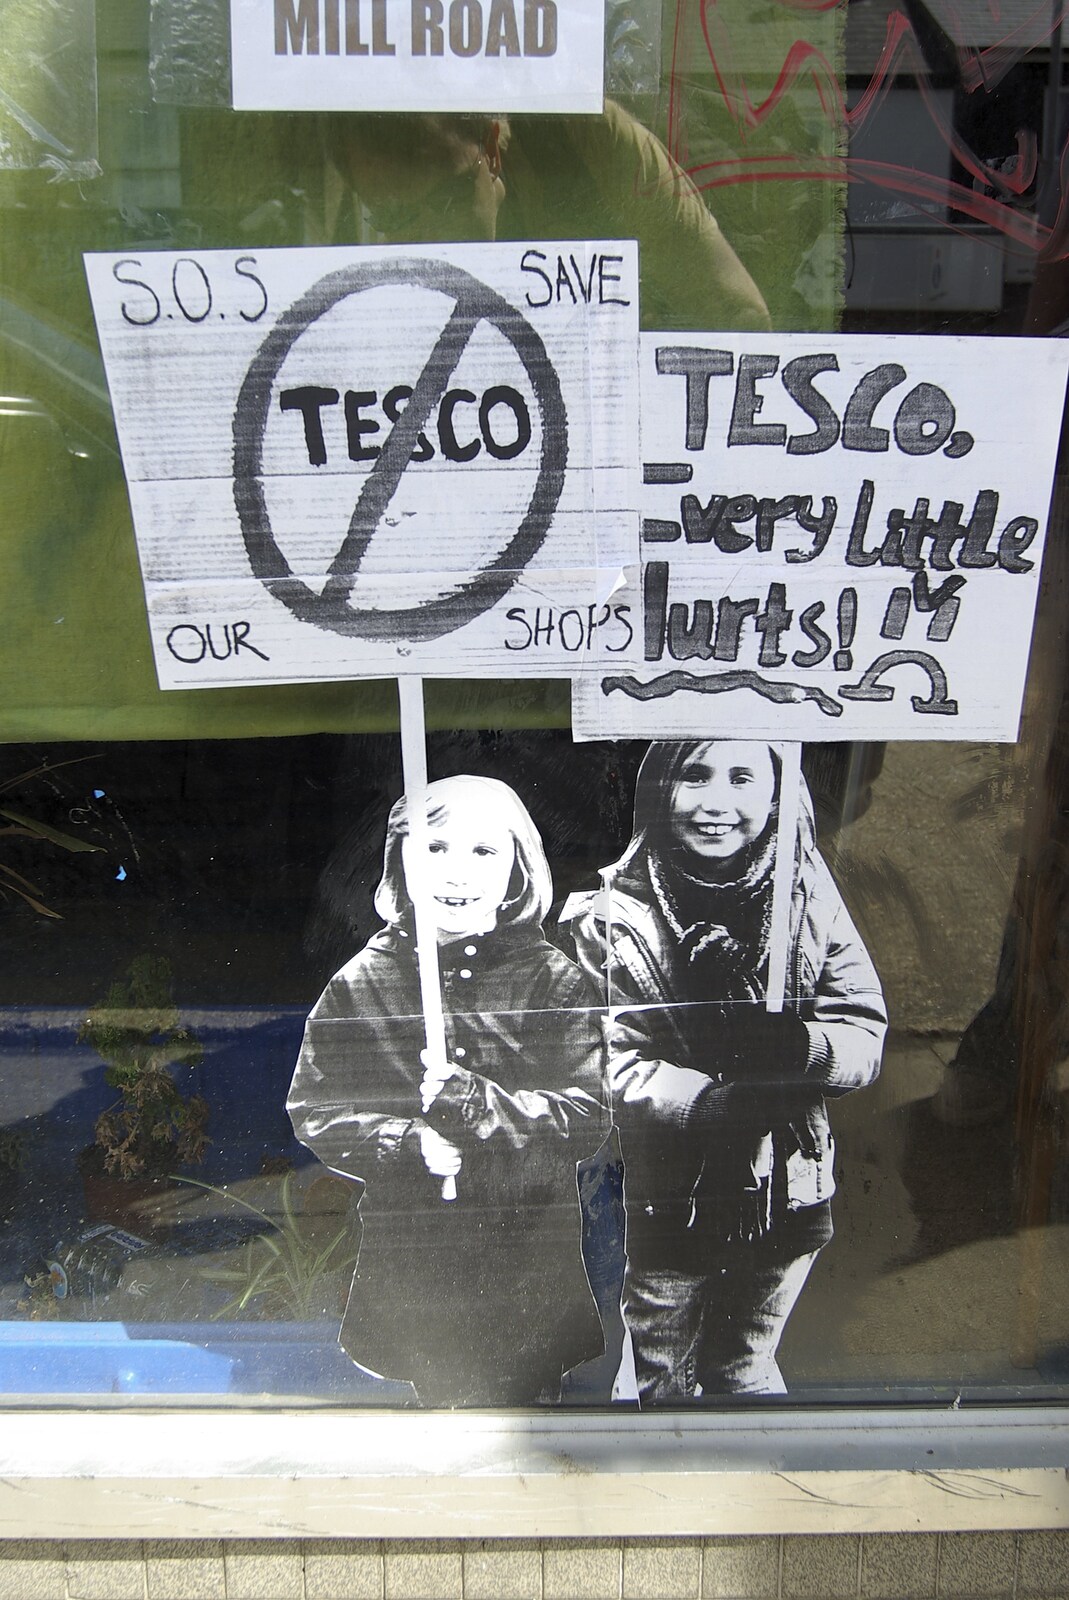 Lucy's Birthday, and the Anti-Tesco Campaign, Mill Road, Cambridge - 7th July 2008: Anti-Tesco protests